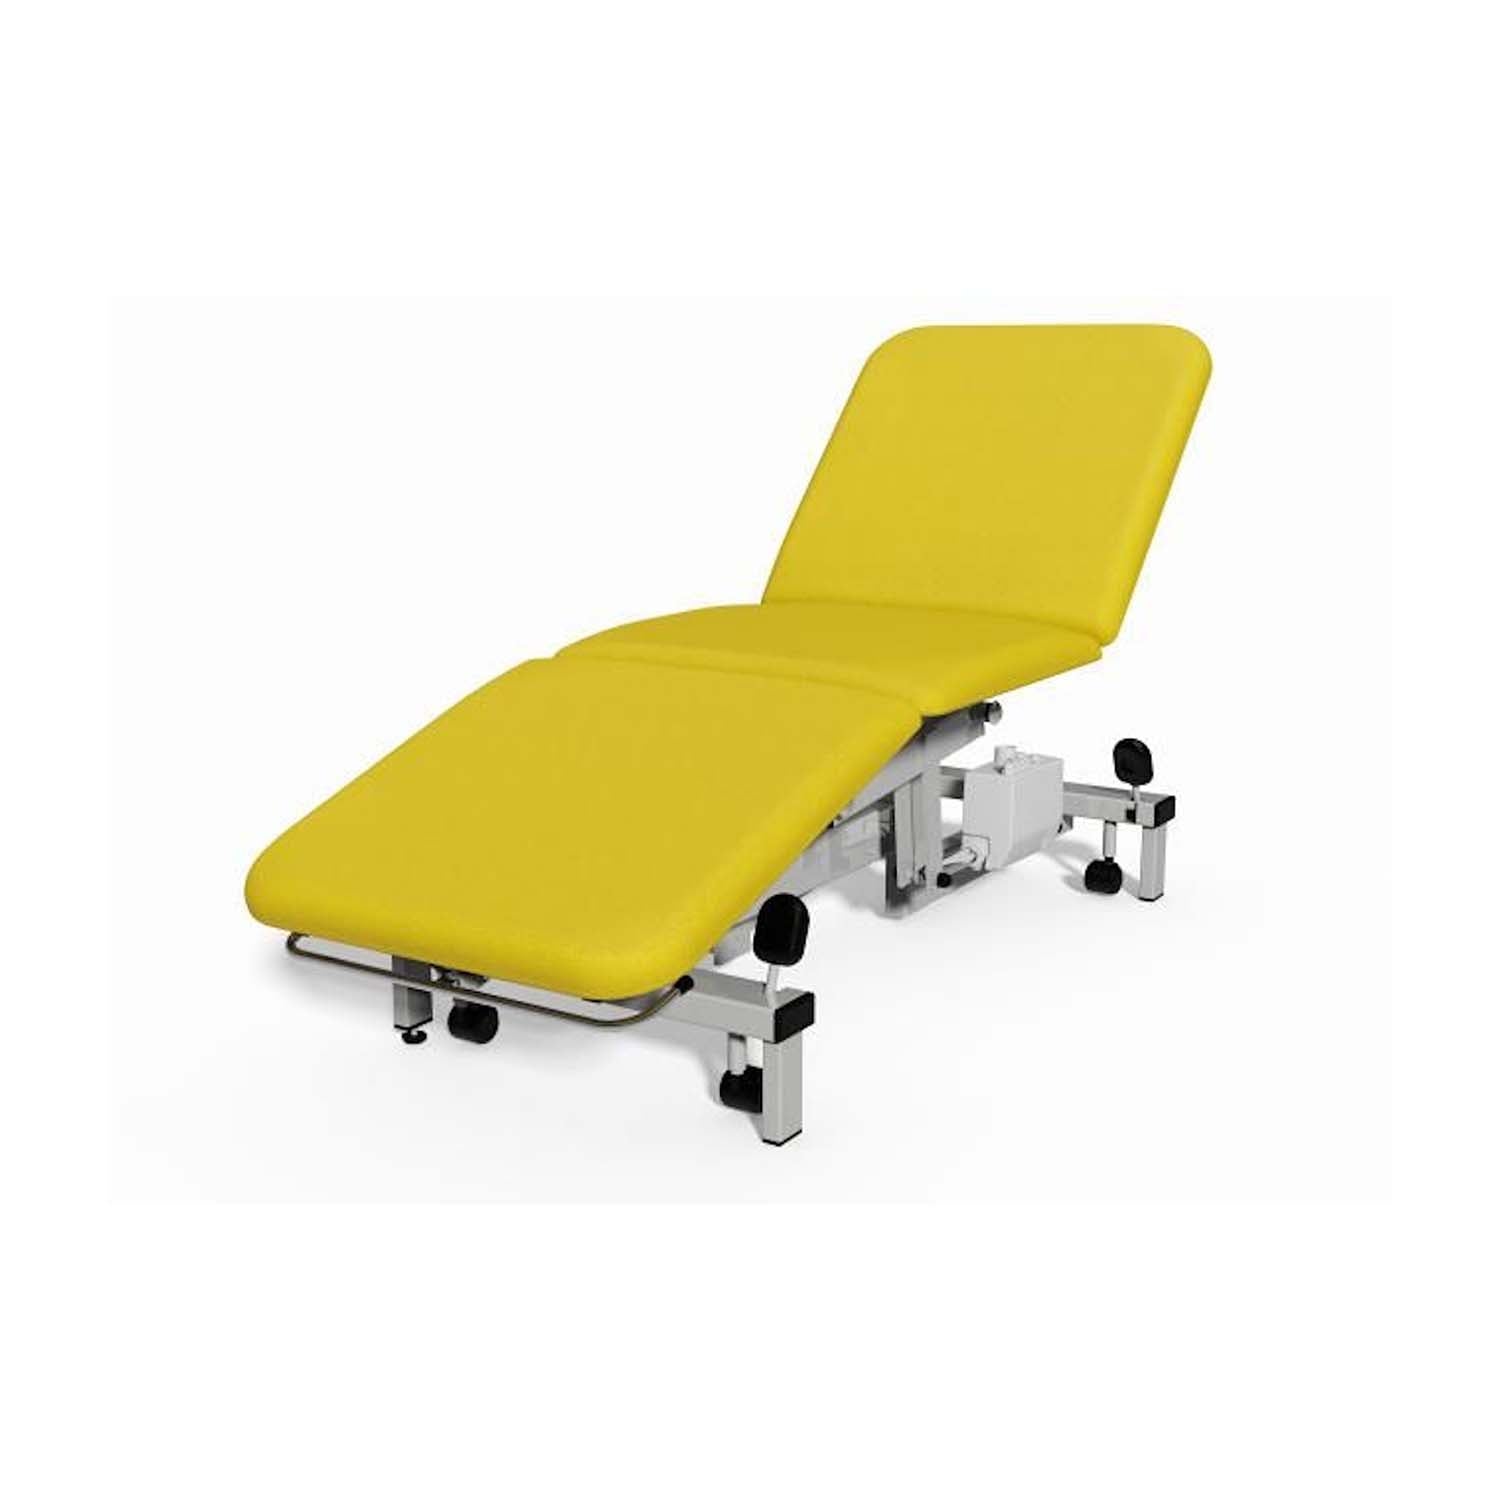 Plinth 2000 Model 503 3 Section Examination Couch | Hydraulic | Marigold